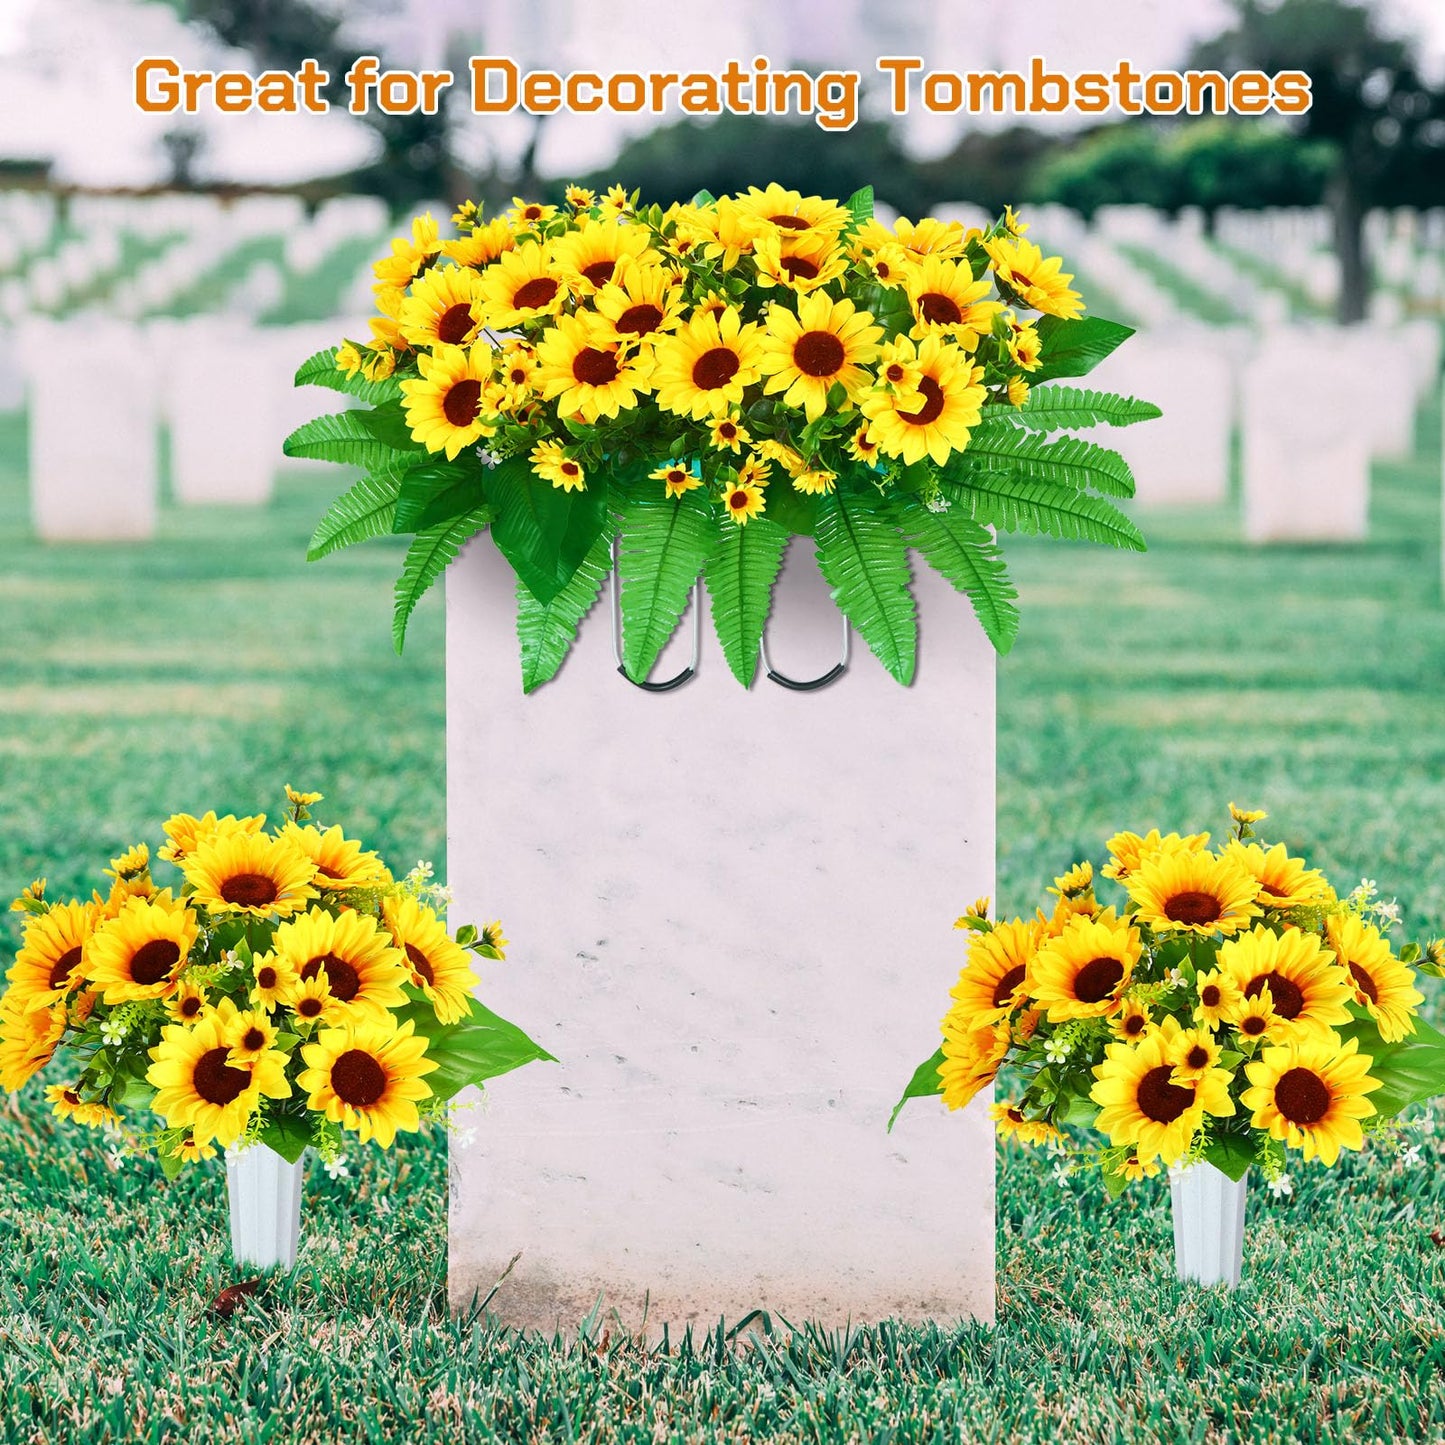 Tigeen 3 Pieces Cemetery Sunflowers Cemetery Flowers for Grave Funeral Headstone Saddle Flowers Artificial Yellow Sunflower Bouquets with Vase Memorial Flowers Florals Outdoor Gravesite Decoration